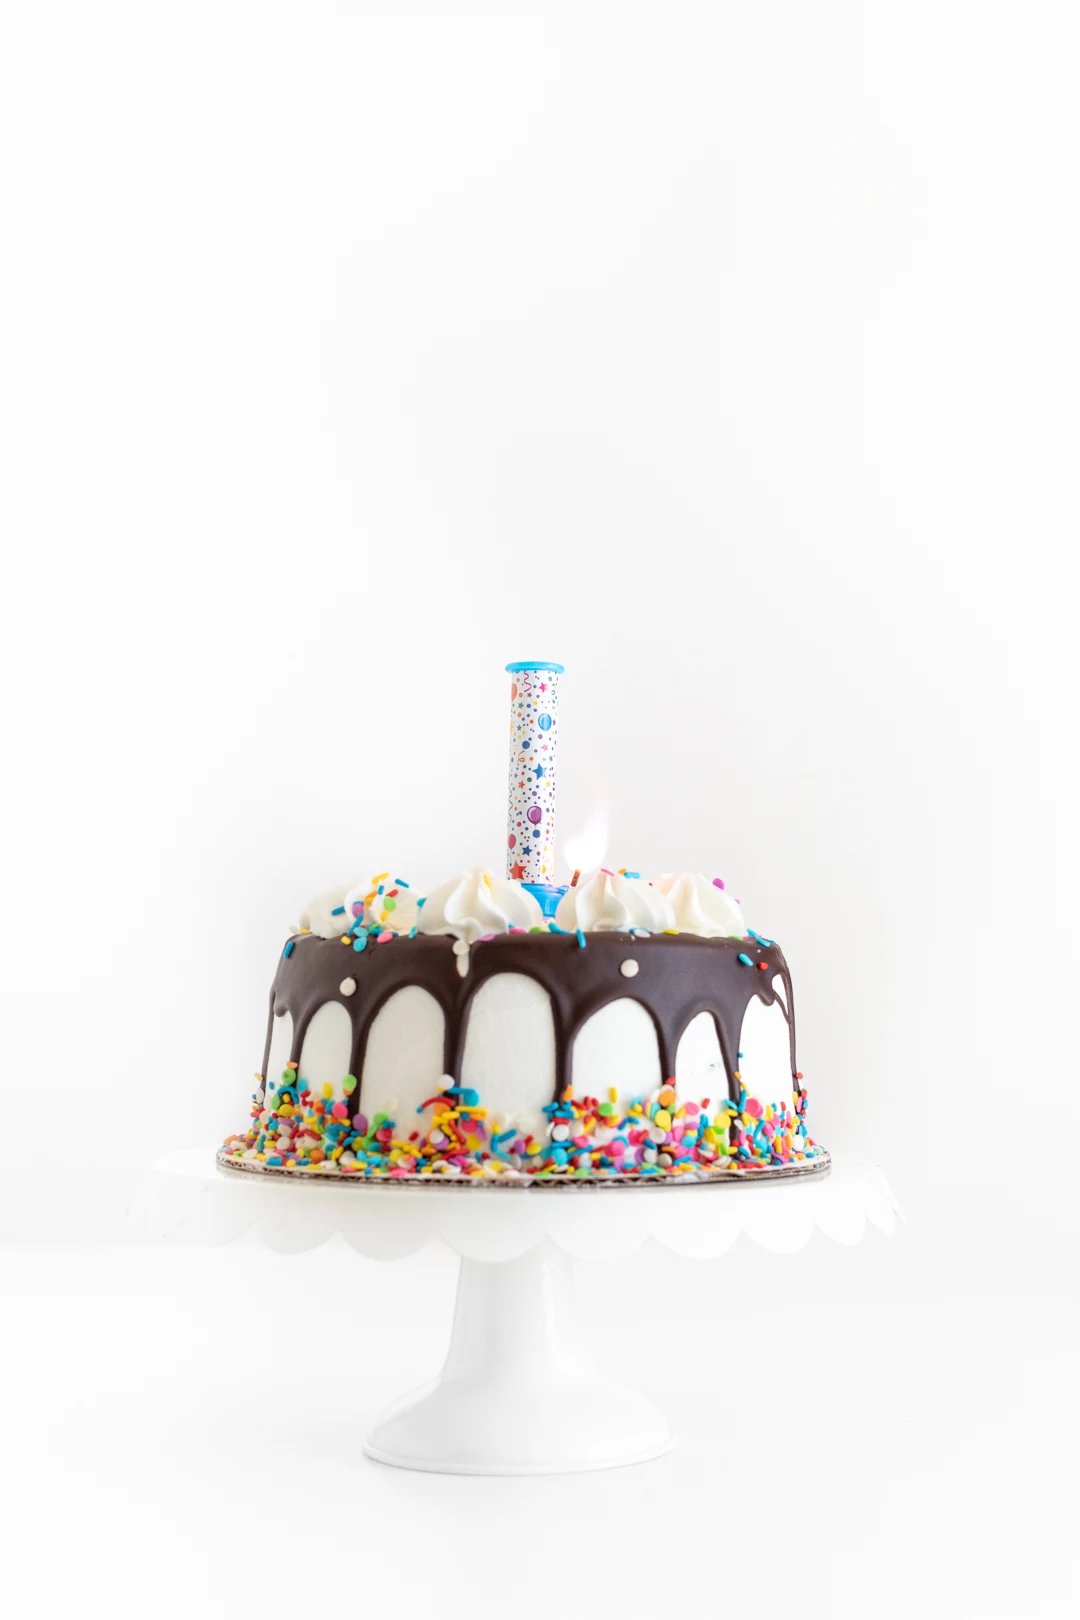 The Top It Birthday Cake Shield May Help Prevent Germs from Contaminating  Desserts